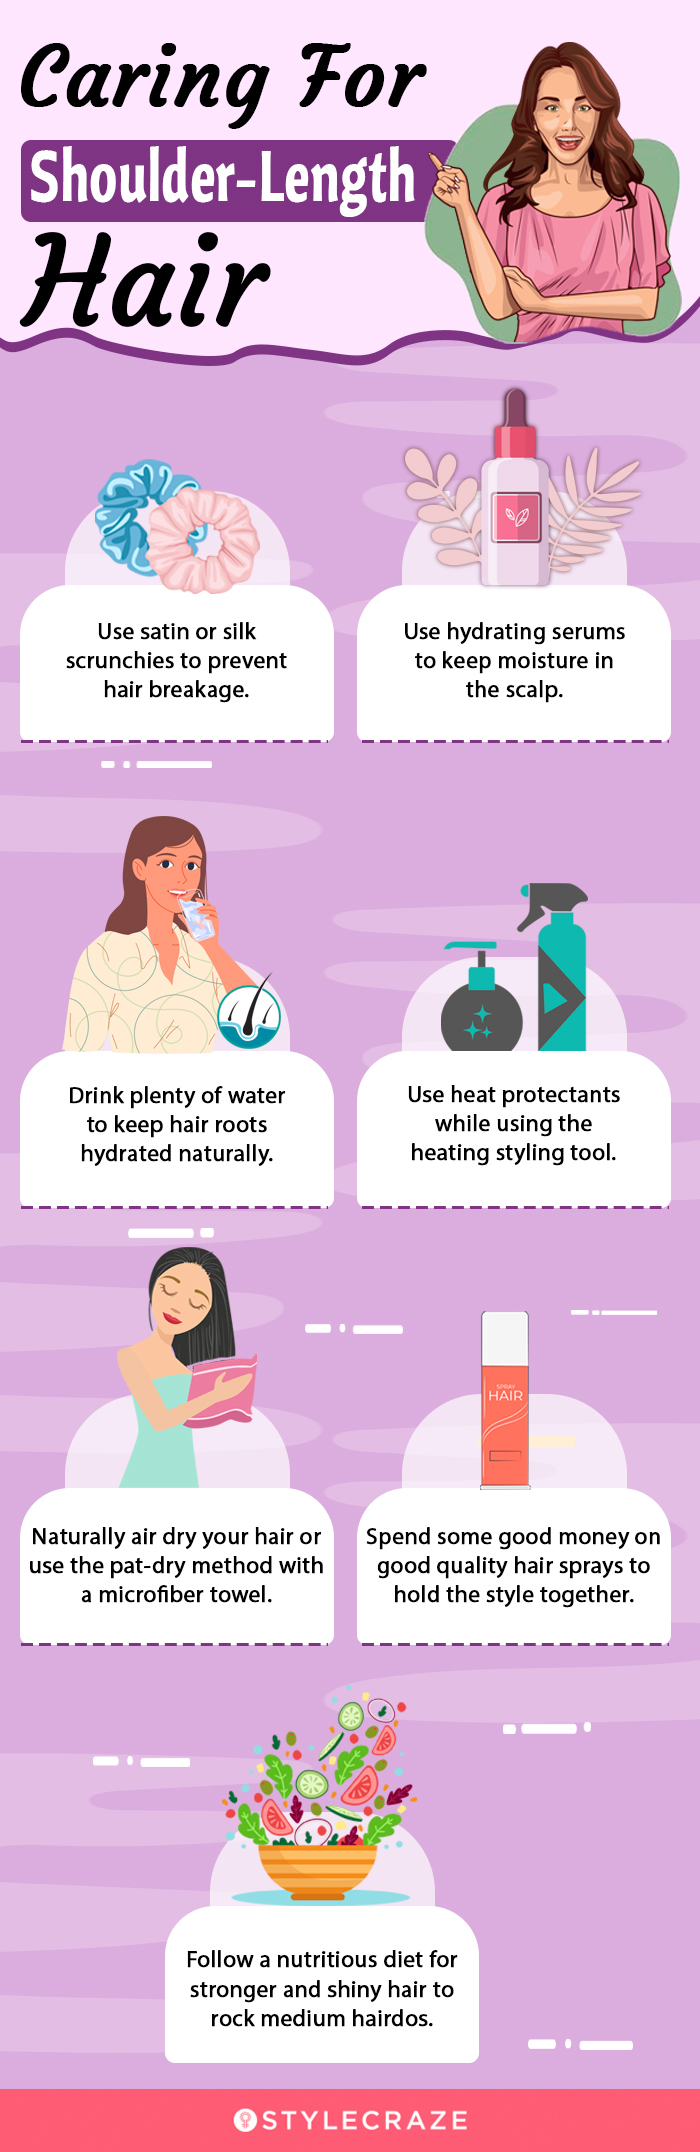 caring for shoulder length hair [infographic]